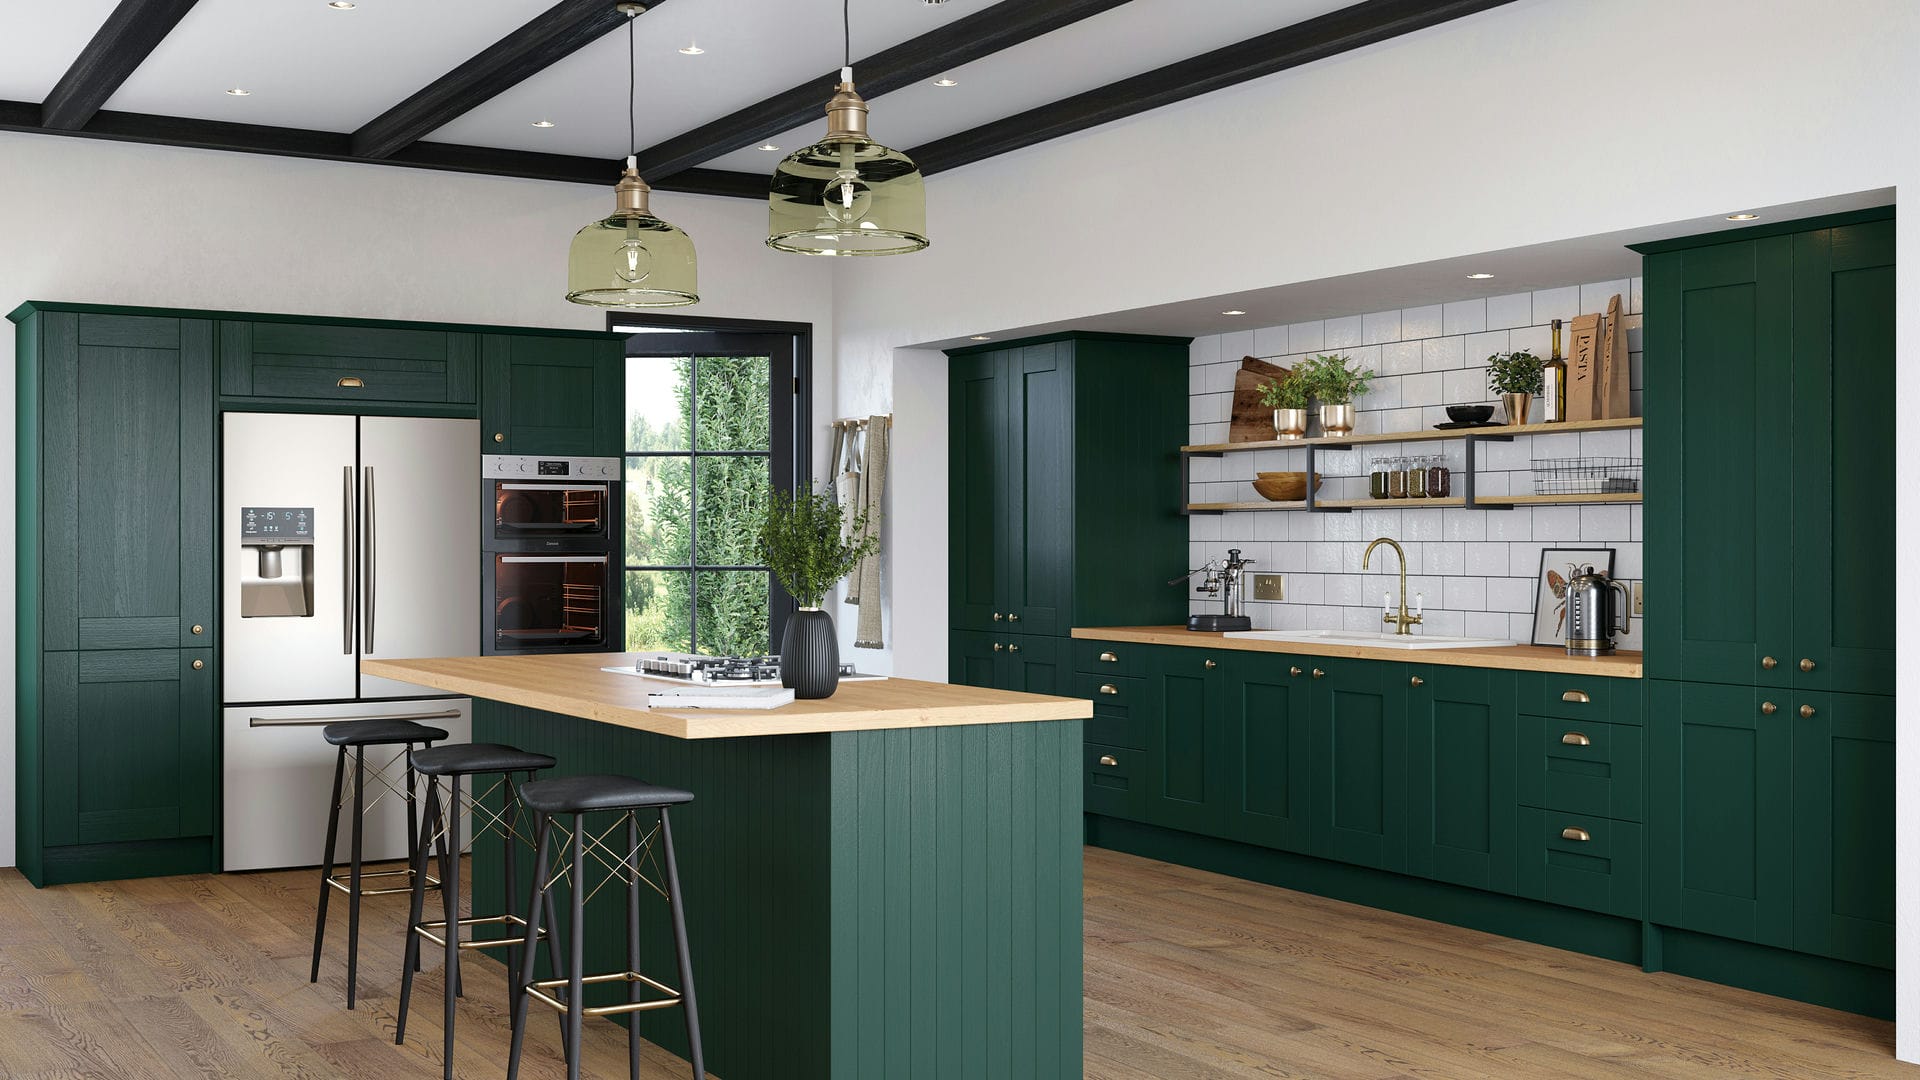 Luxury Shaker Fir Green kitchens combining classic shaker luxury with the deep, tranquil hue of fir green